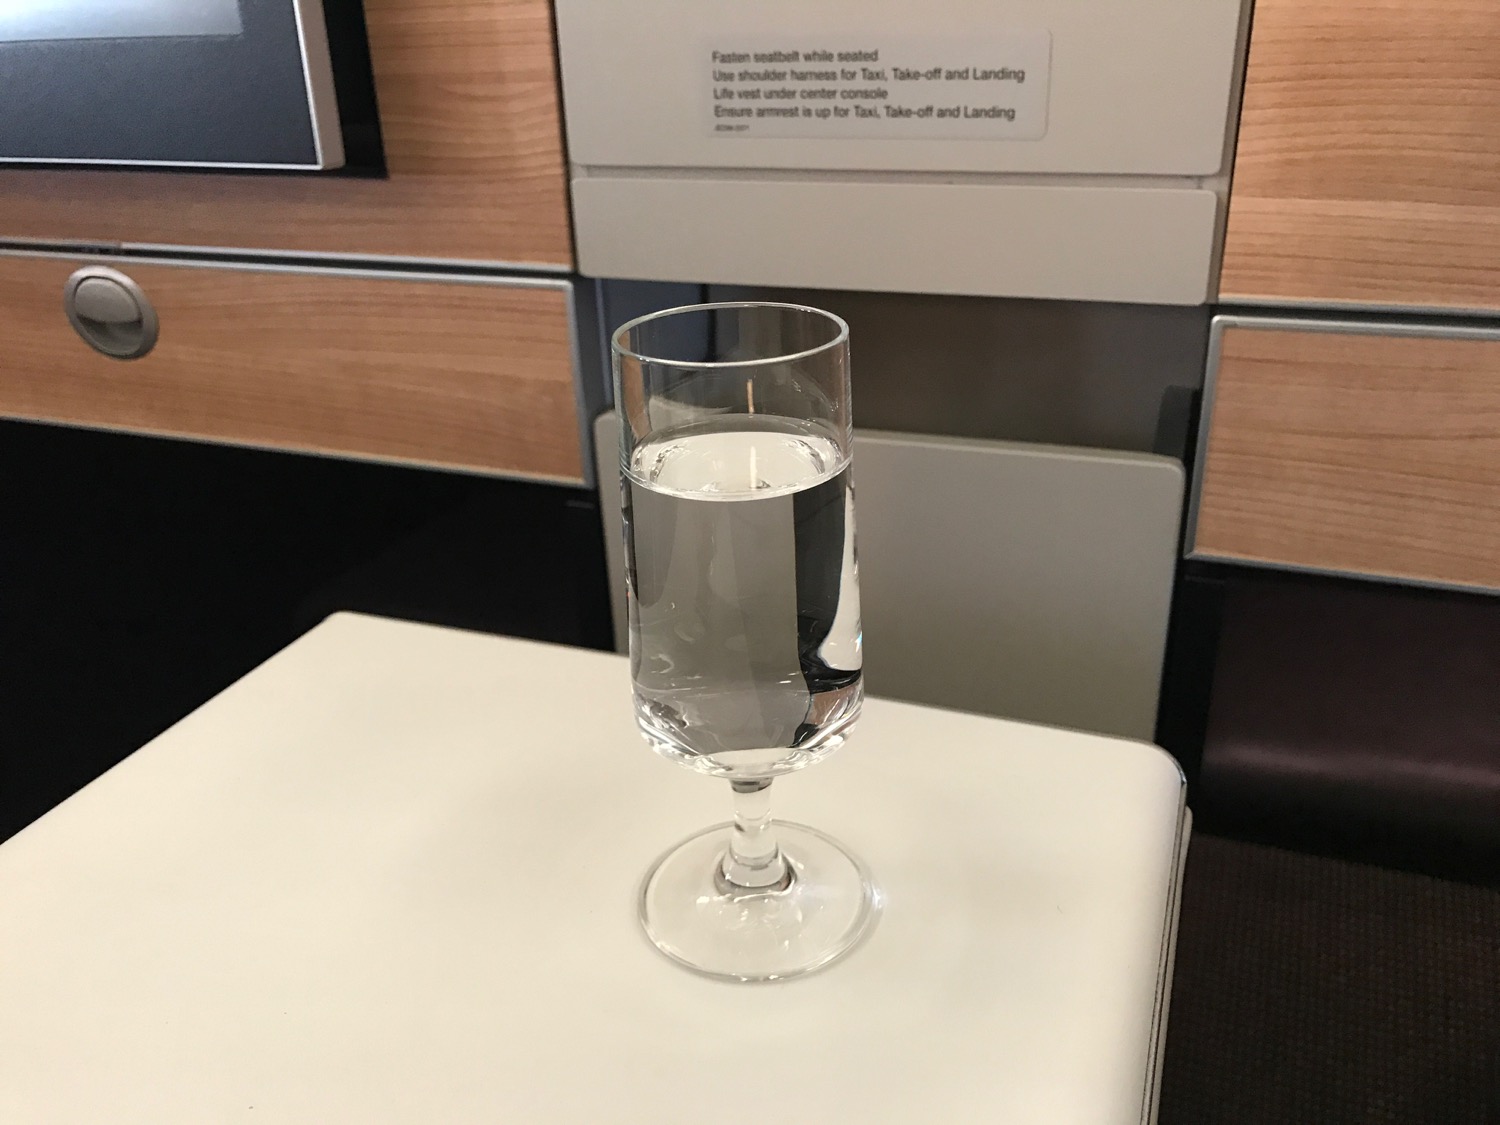 a glass of water on a table